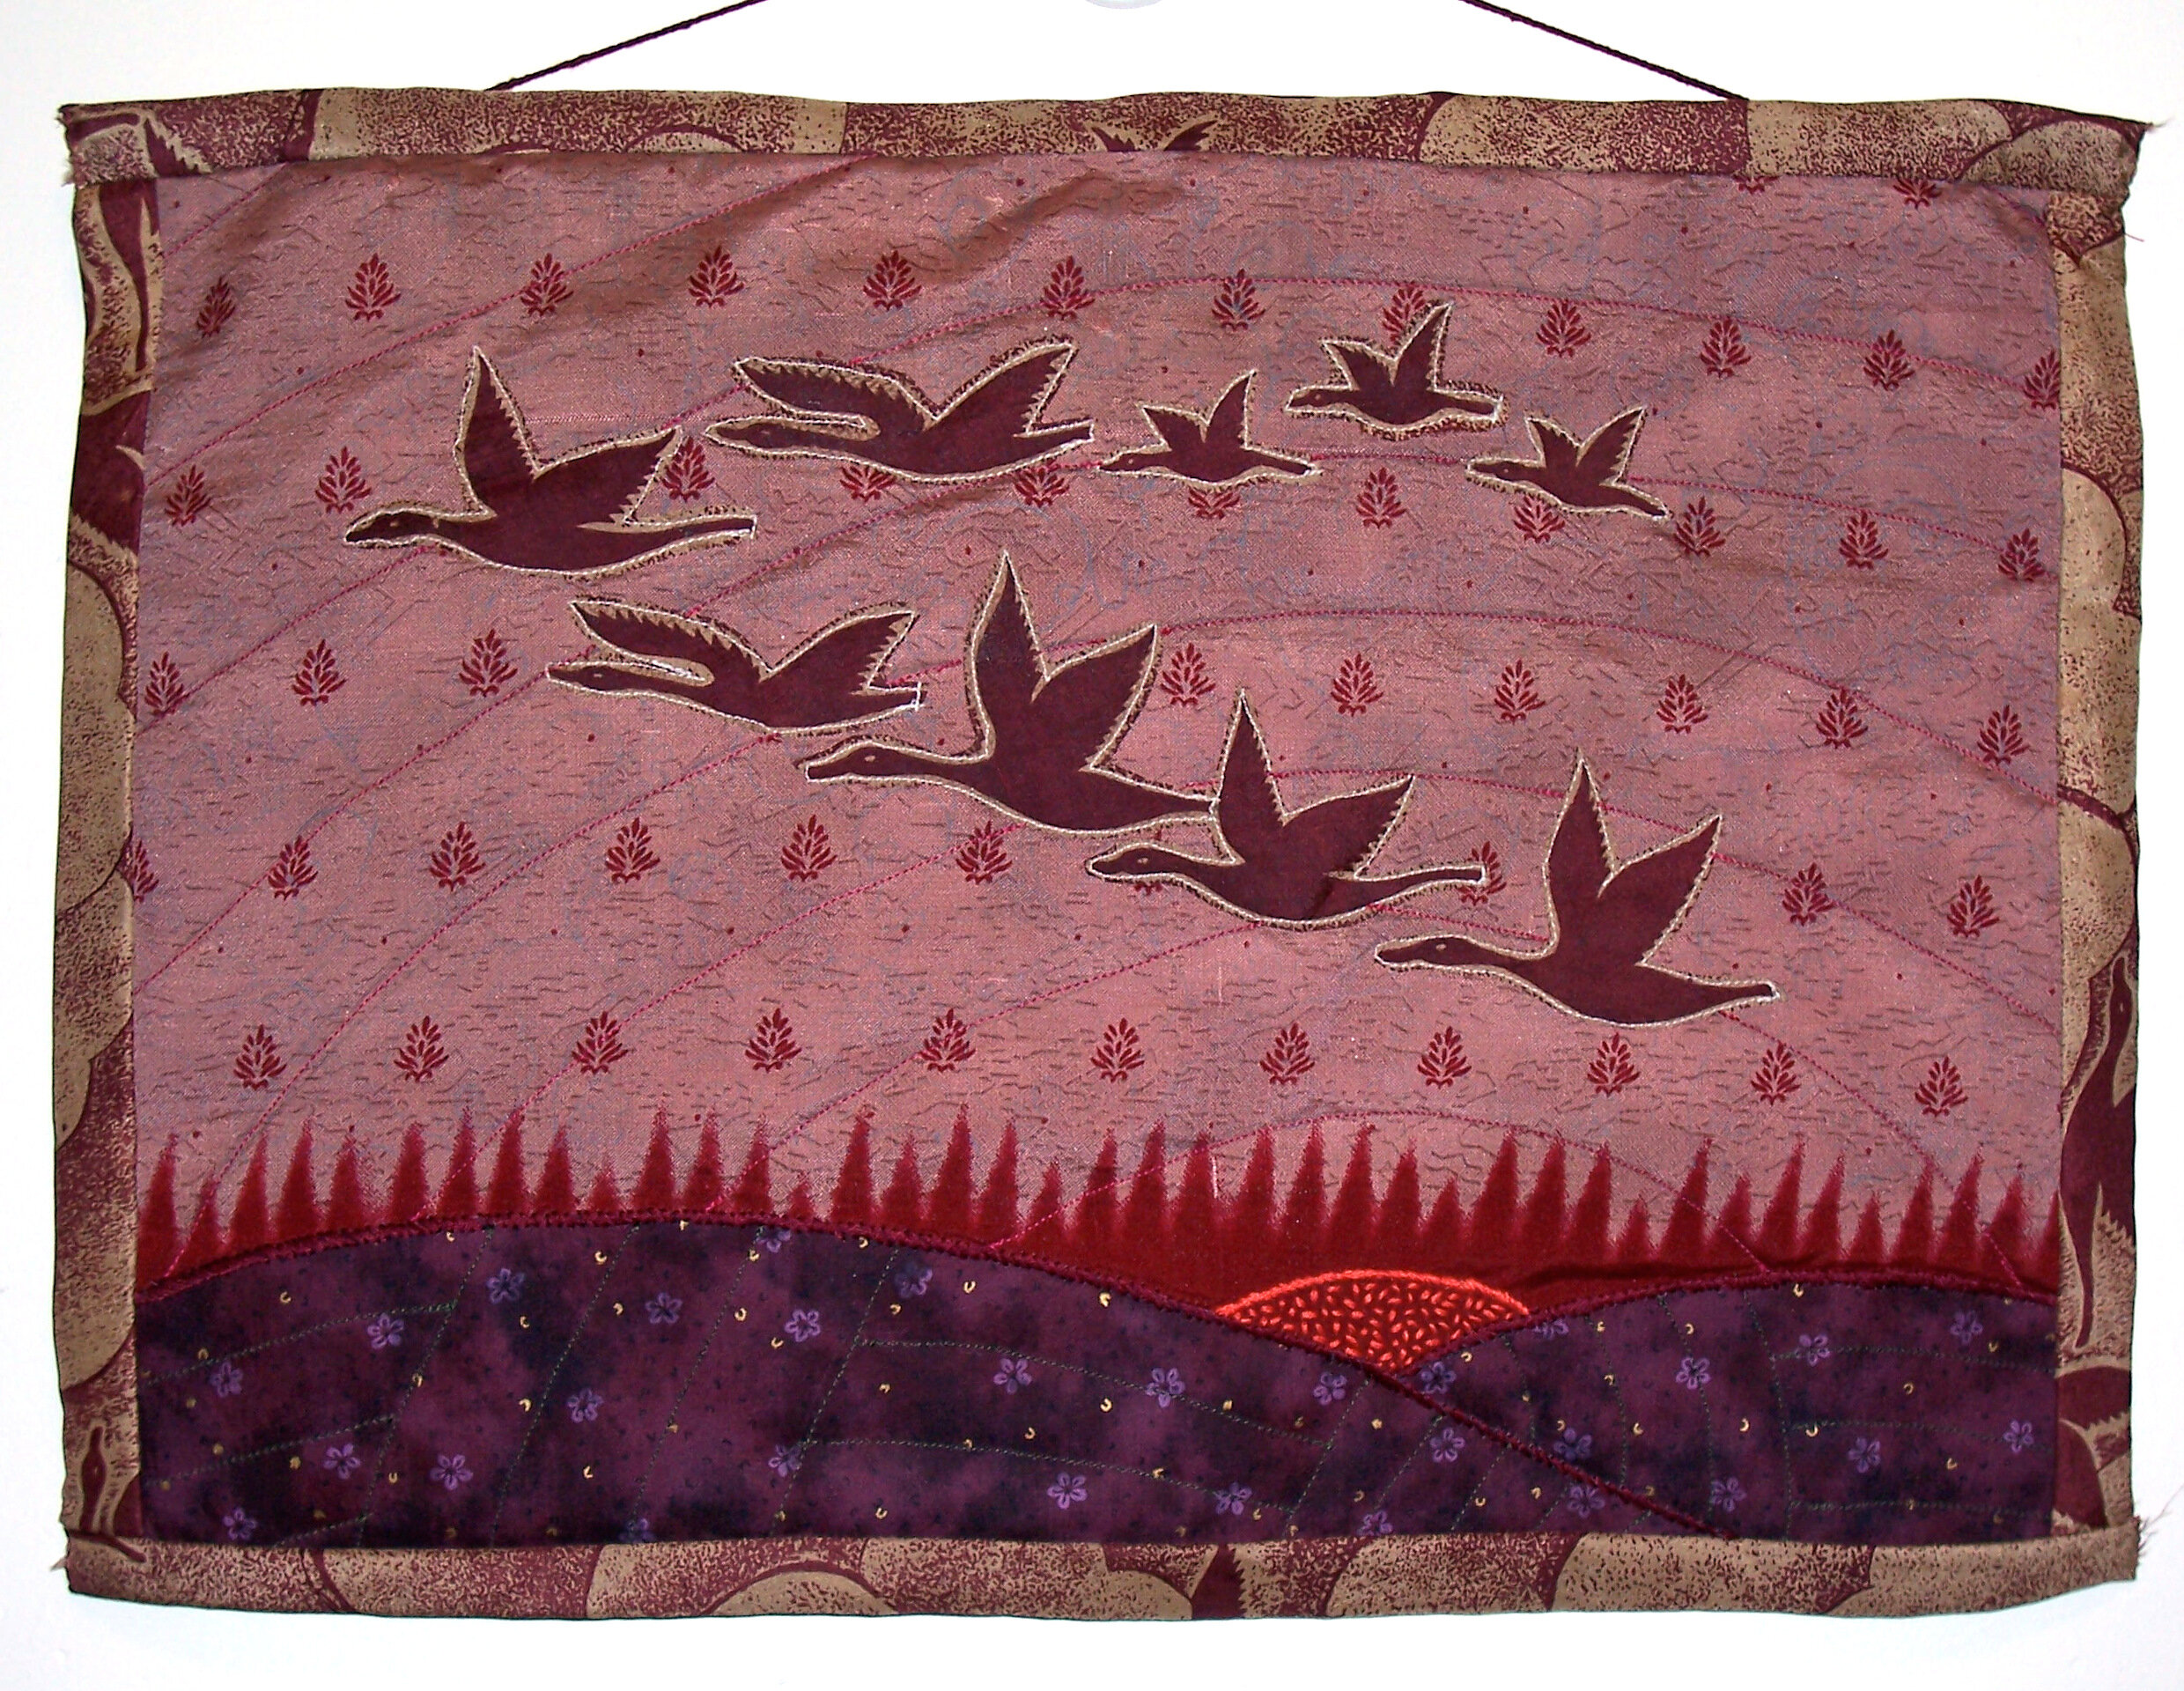  In Flight  Silk and cotton fabric, hand embroidery, and machine sewing 